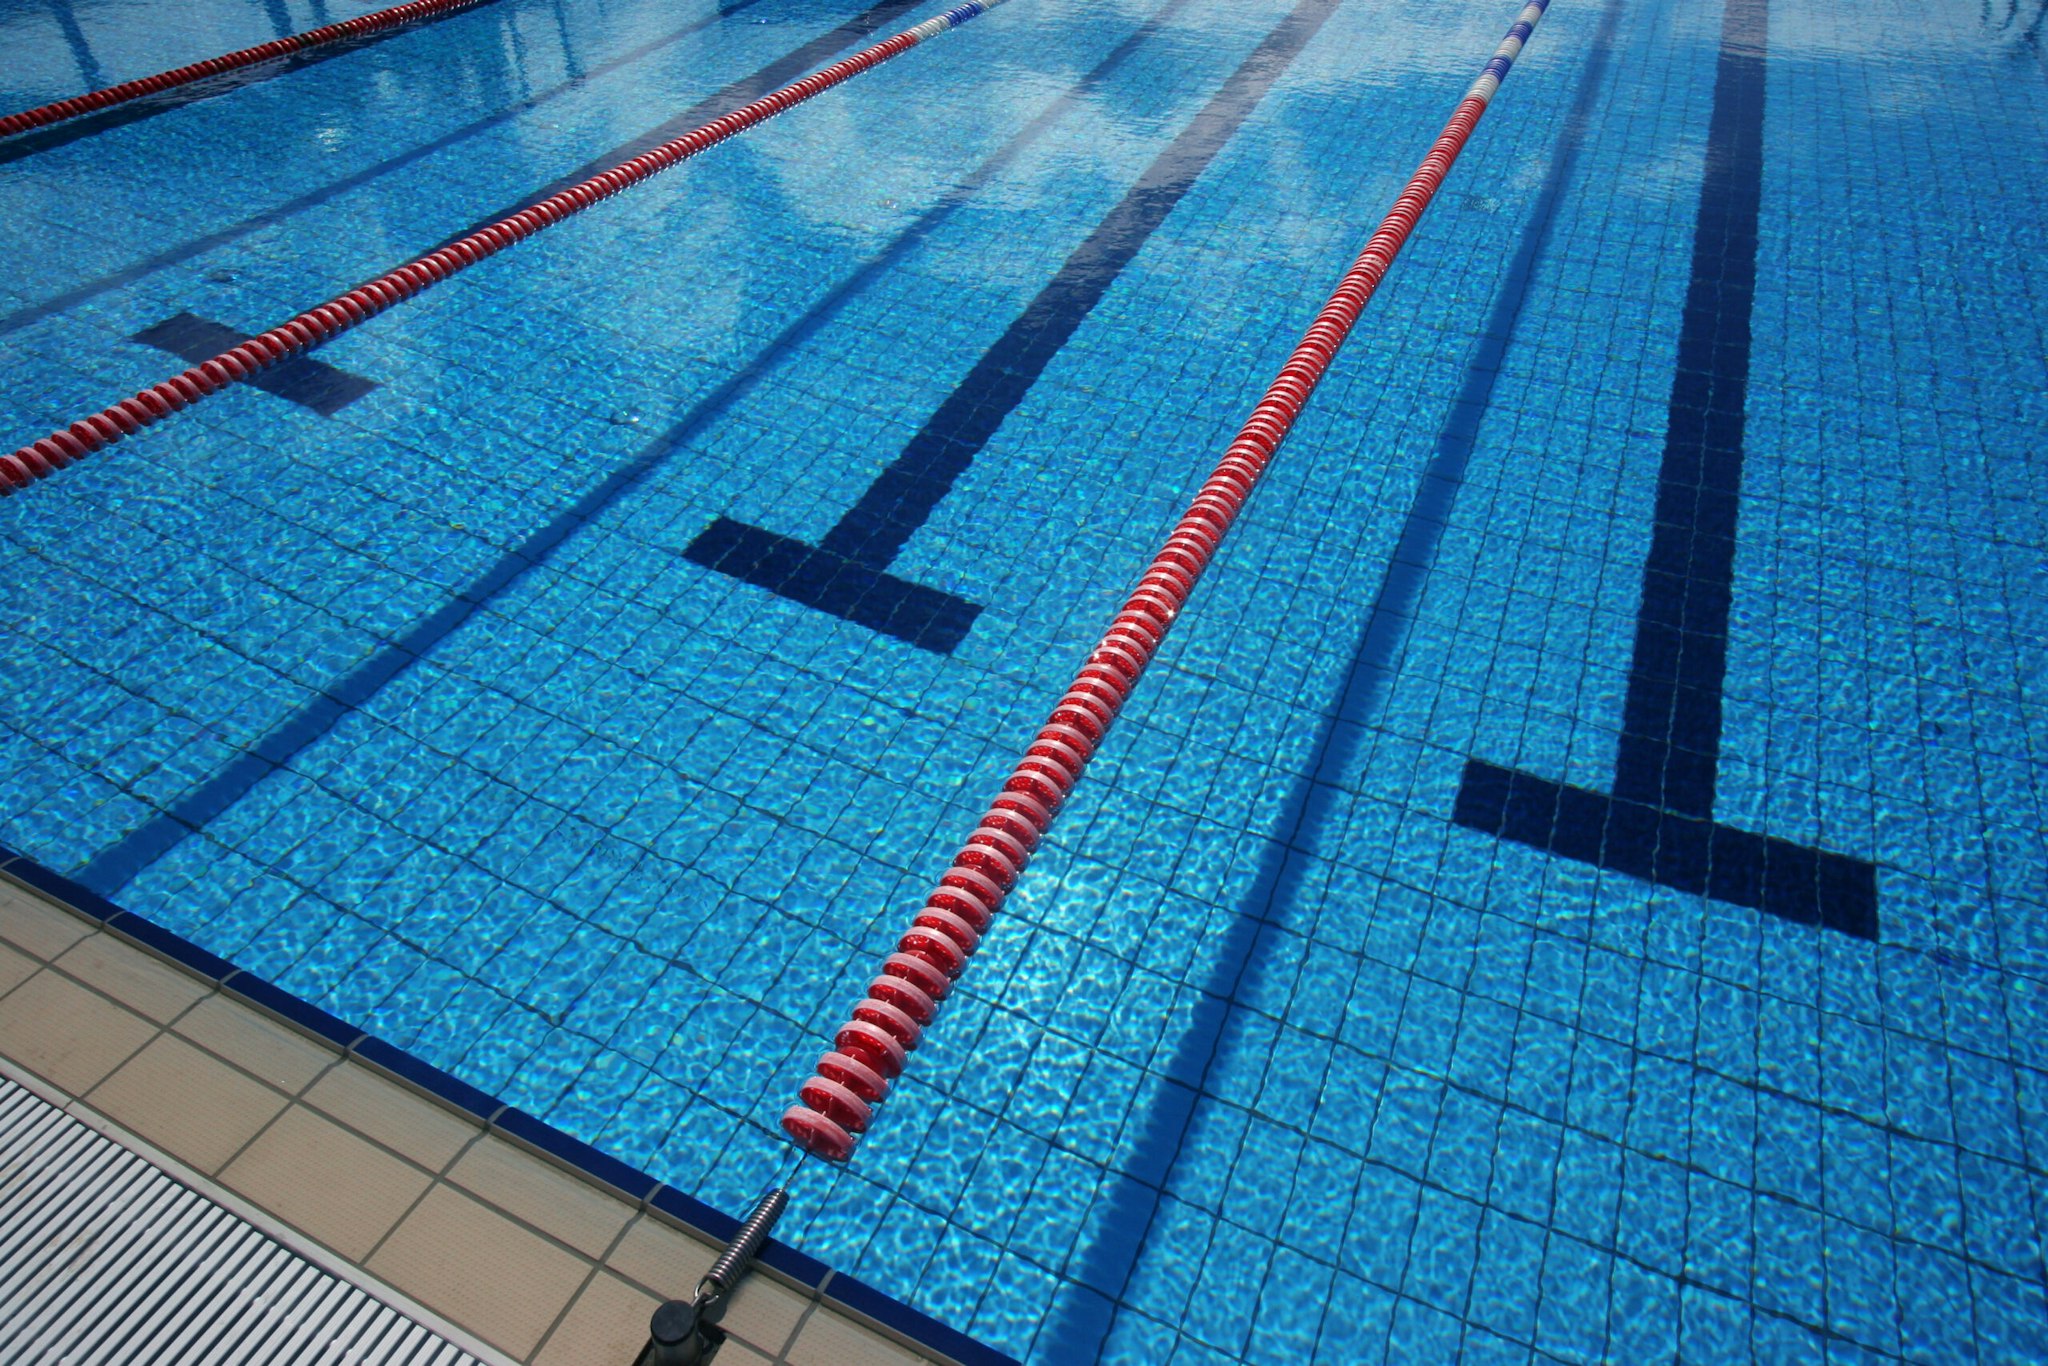 80 Year Old Woman Banned From Community Pool After Complaining Man